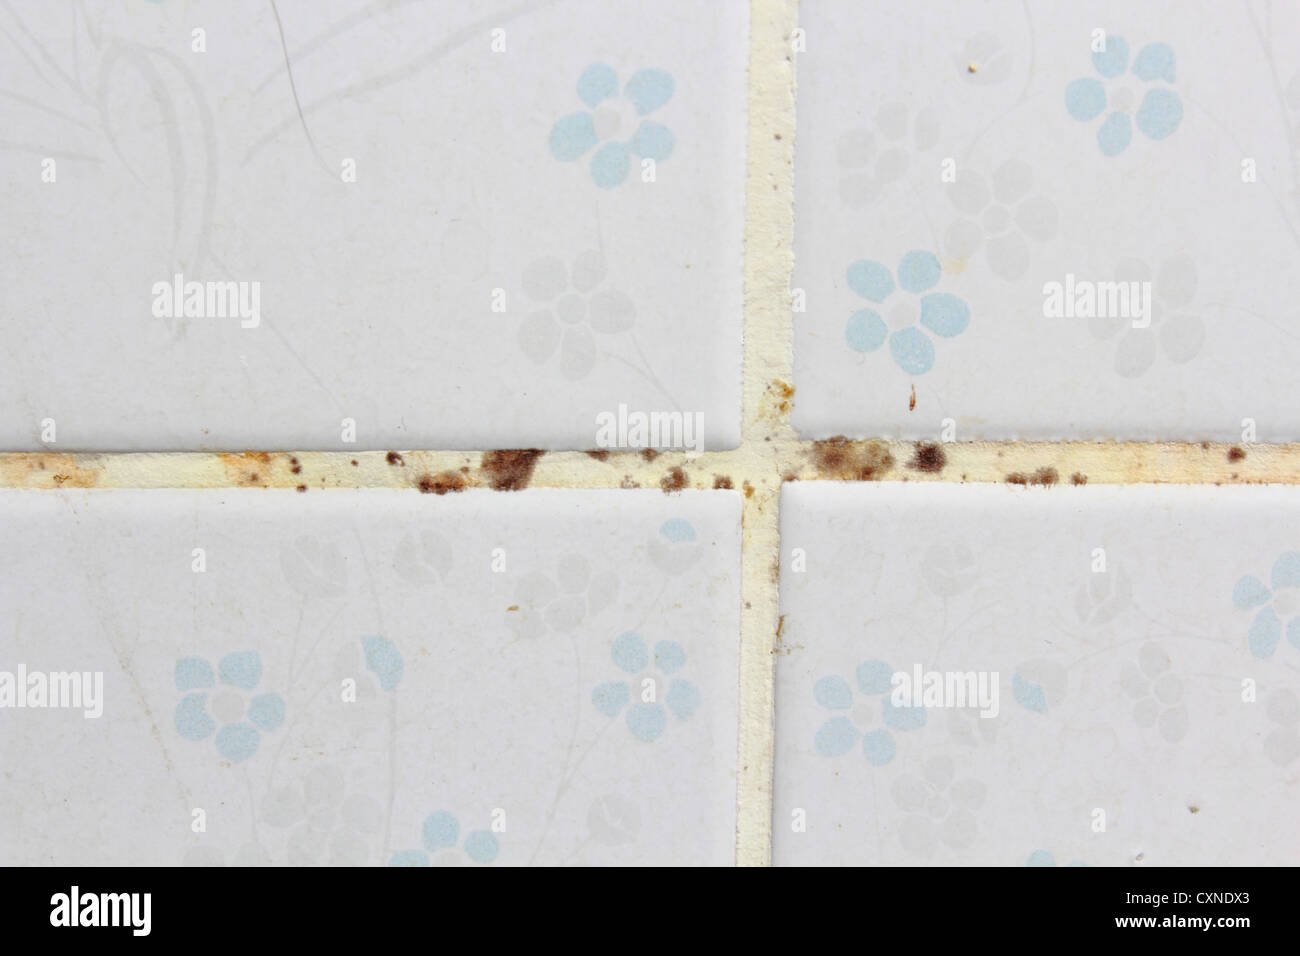 Mold on tile grout Stock Photo